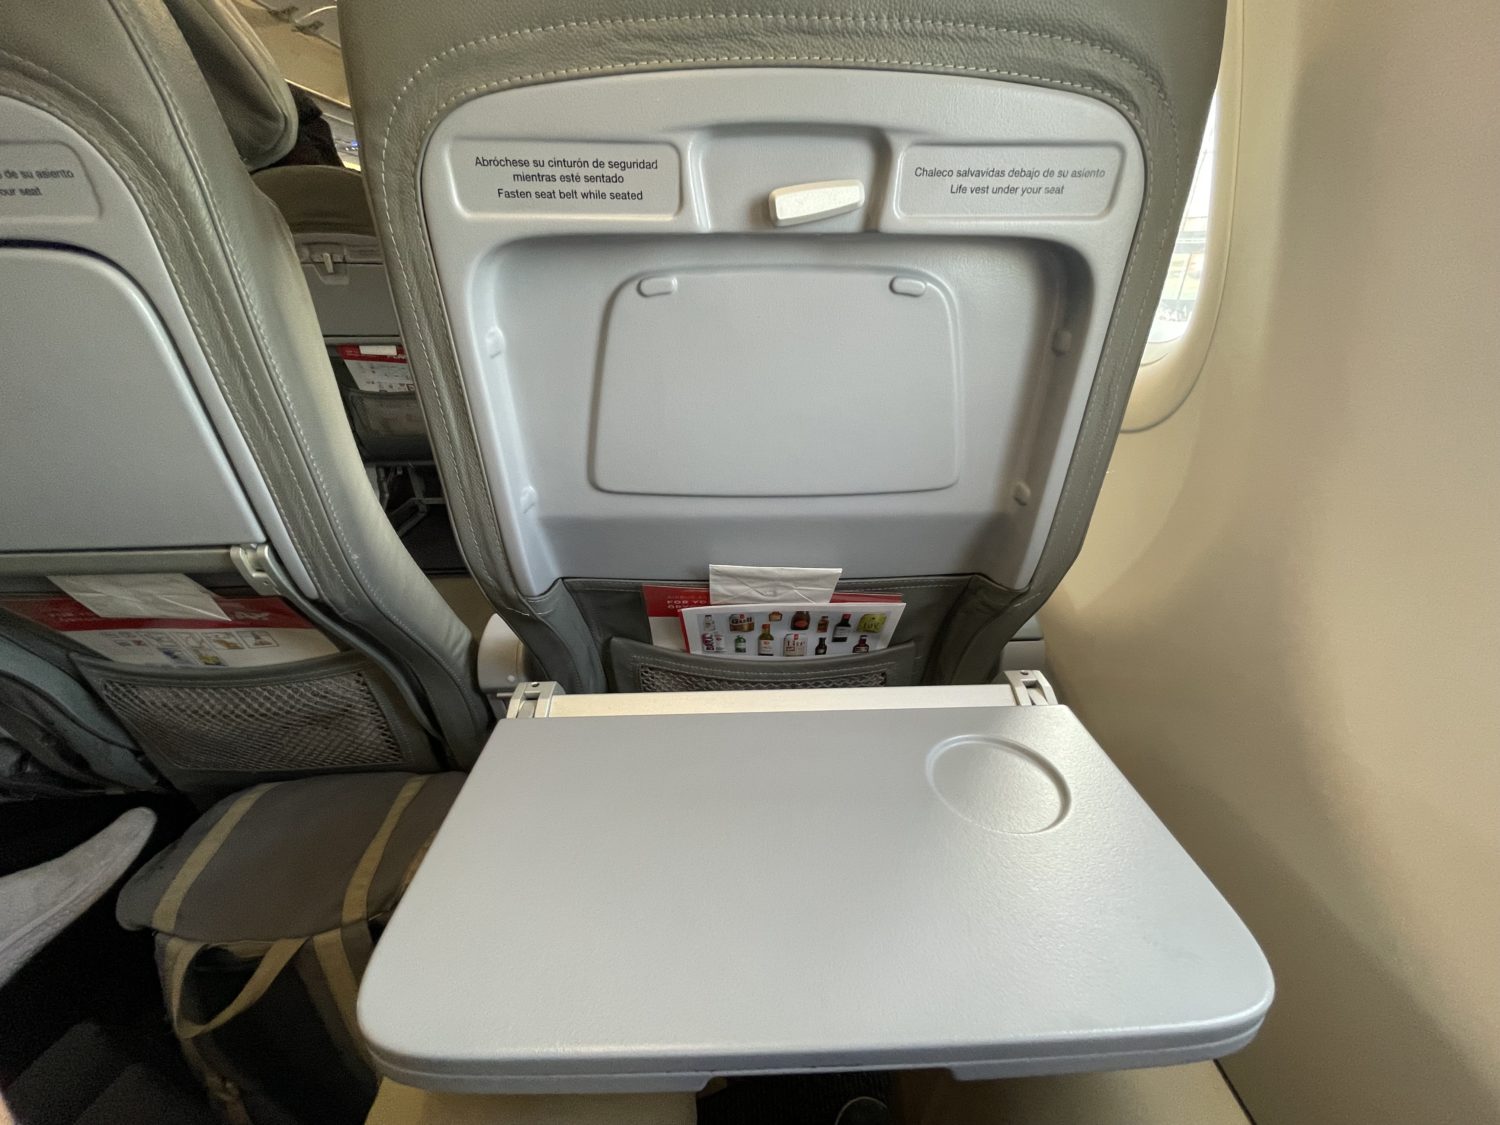 PLAY Airlines review - tray table